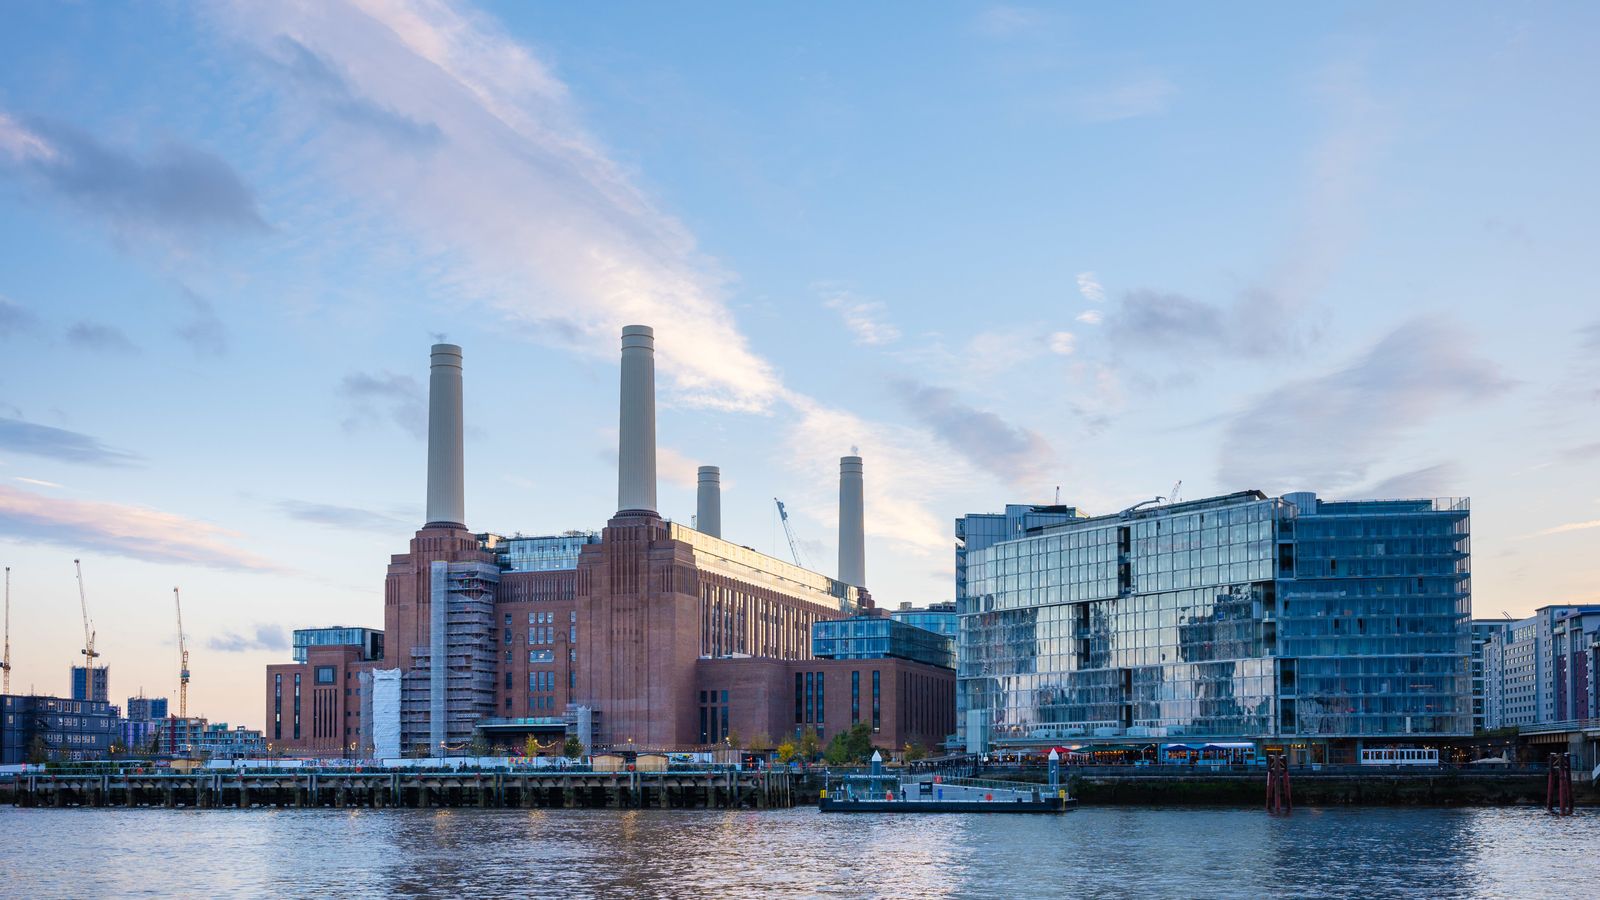 Battersea Power Station prepares for grand reopening as office, property and shopping hub